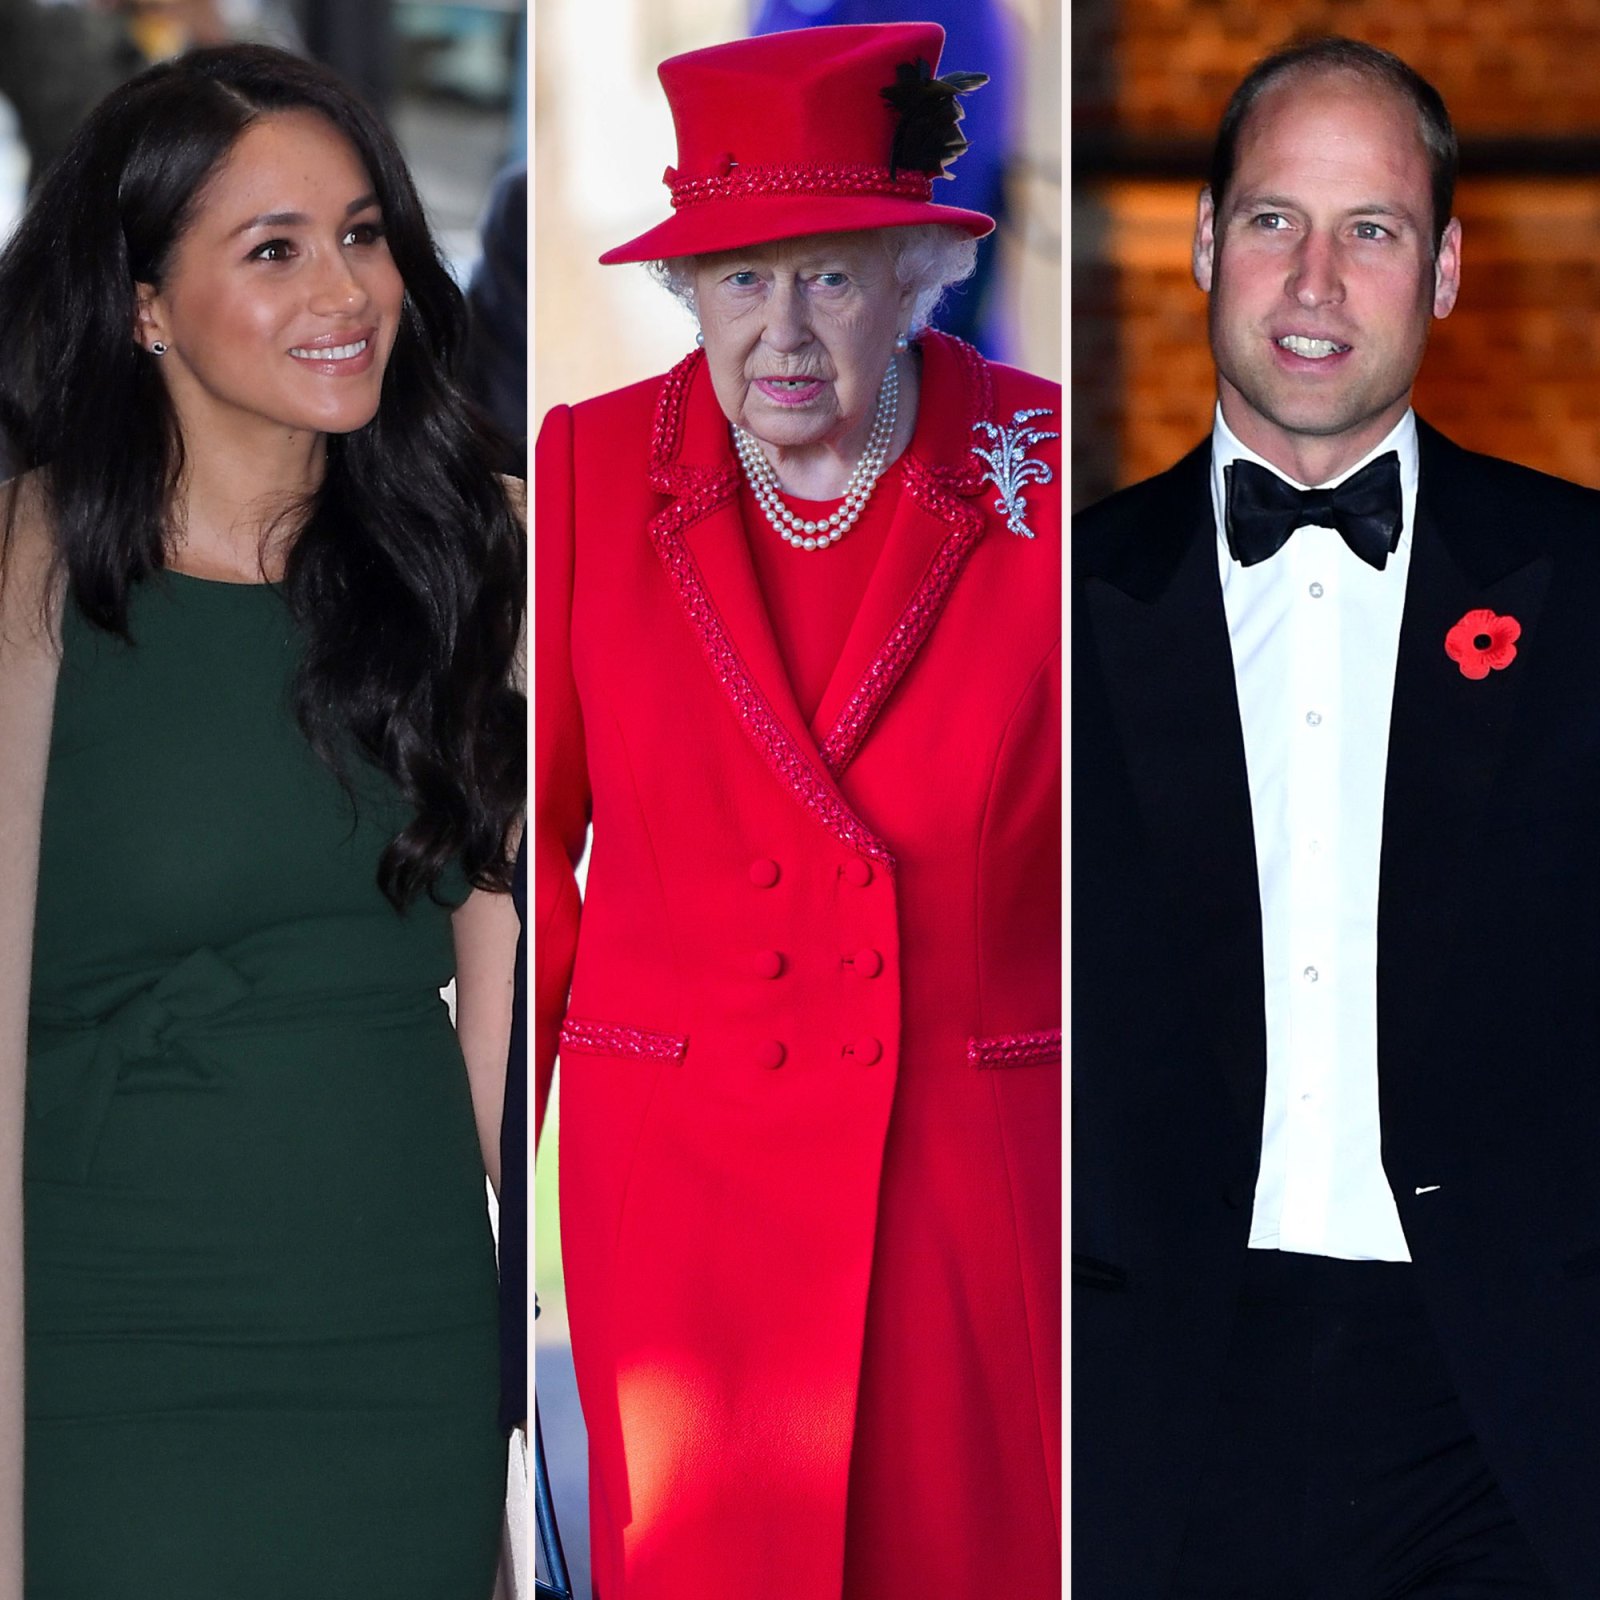 Prince Harry Reveals How Meghan Markle Met the Royal Family: Queen Elizabeth II, Prince William and More green dress